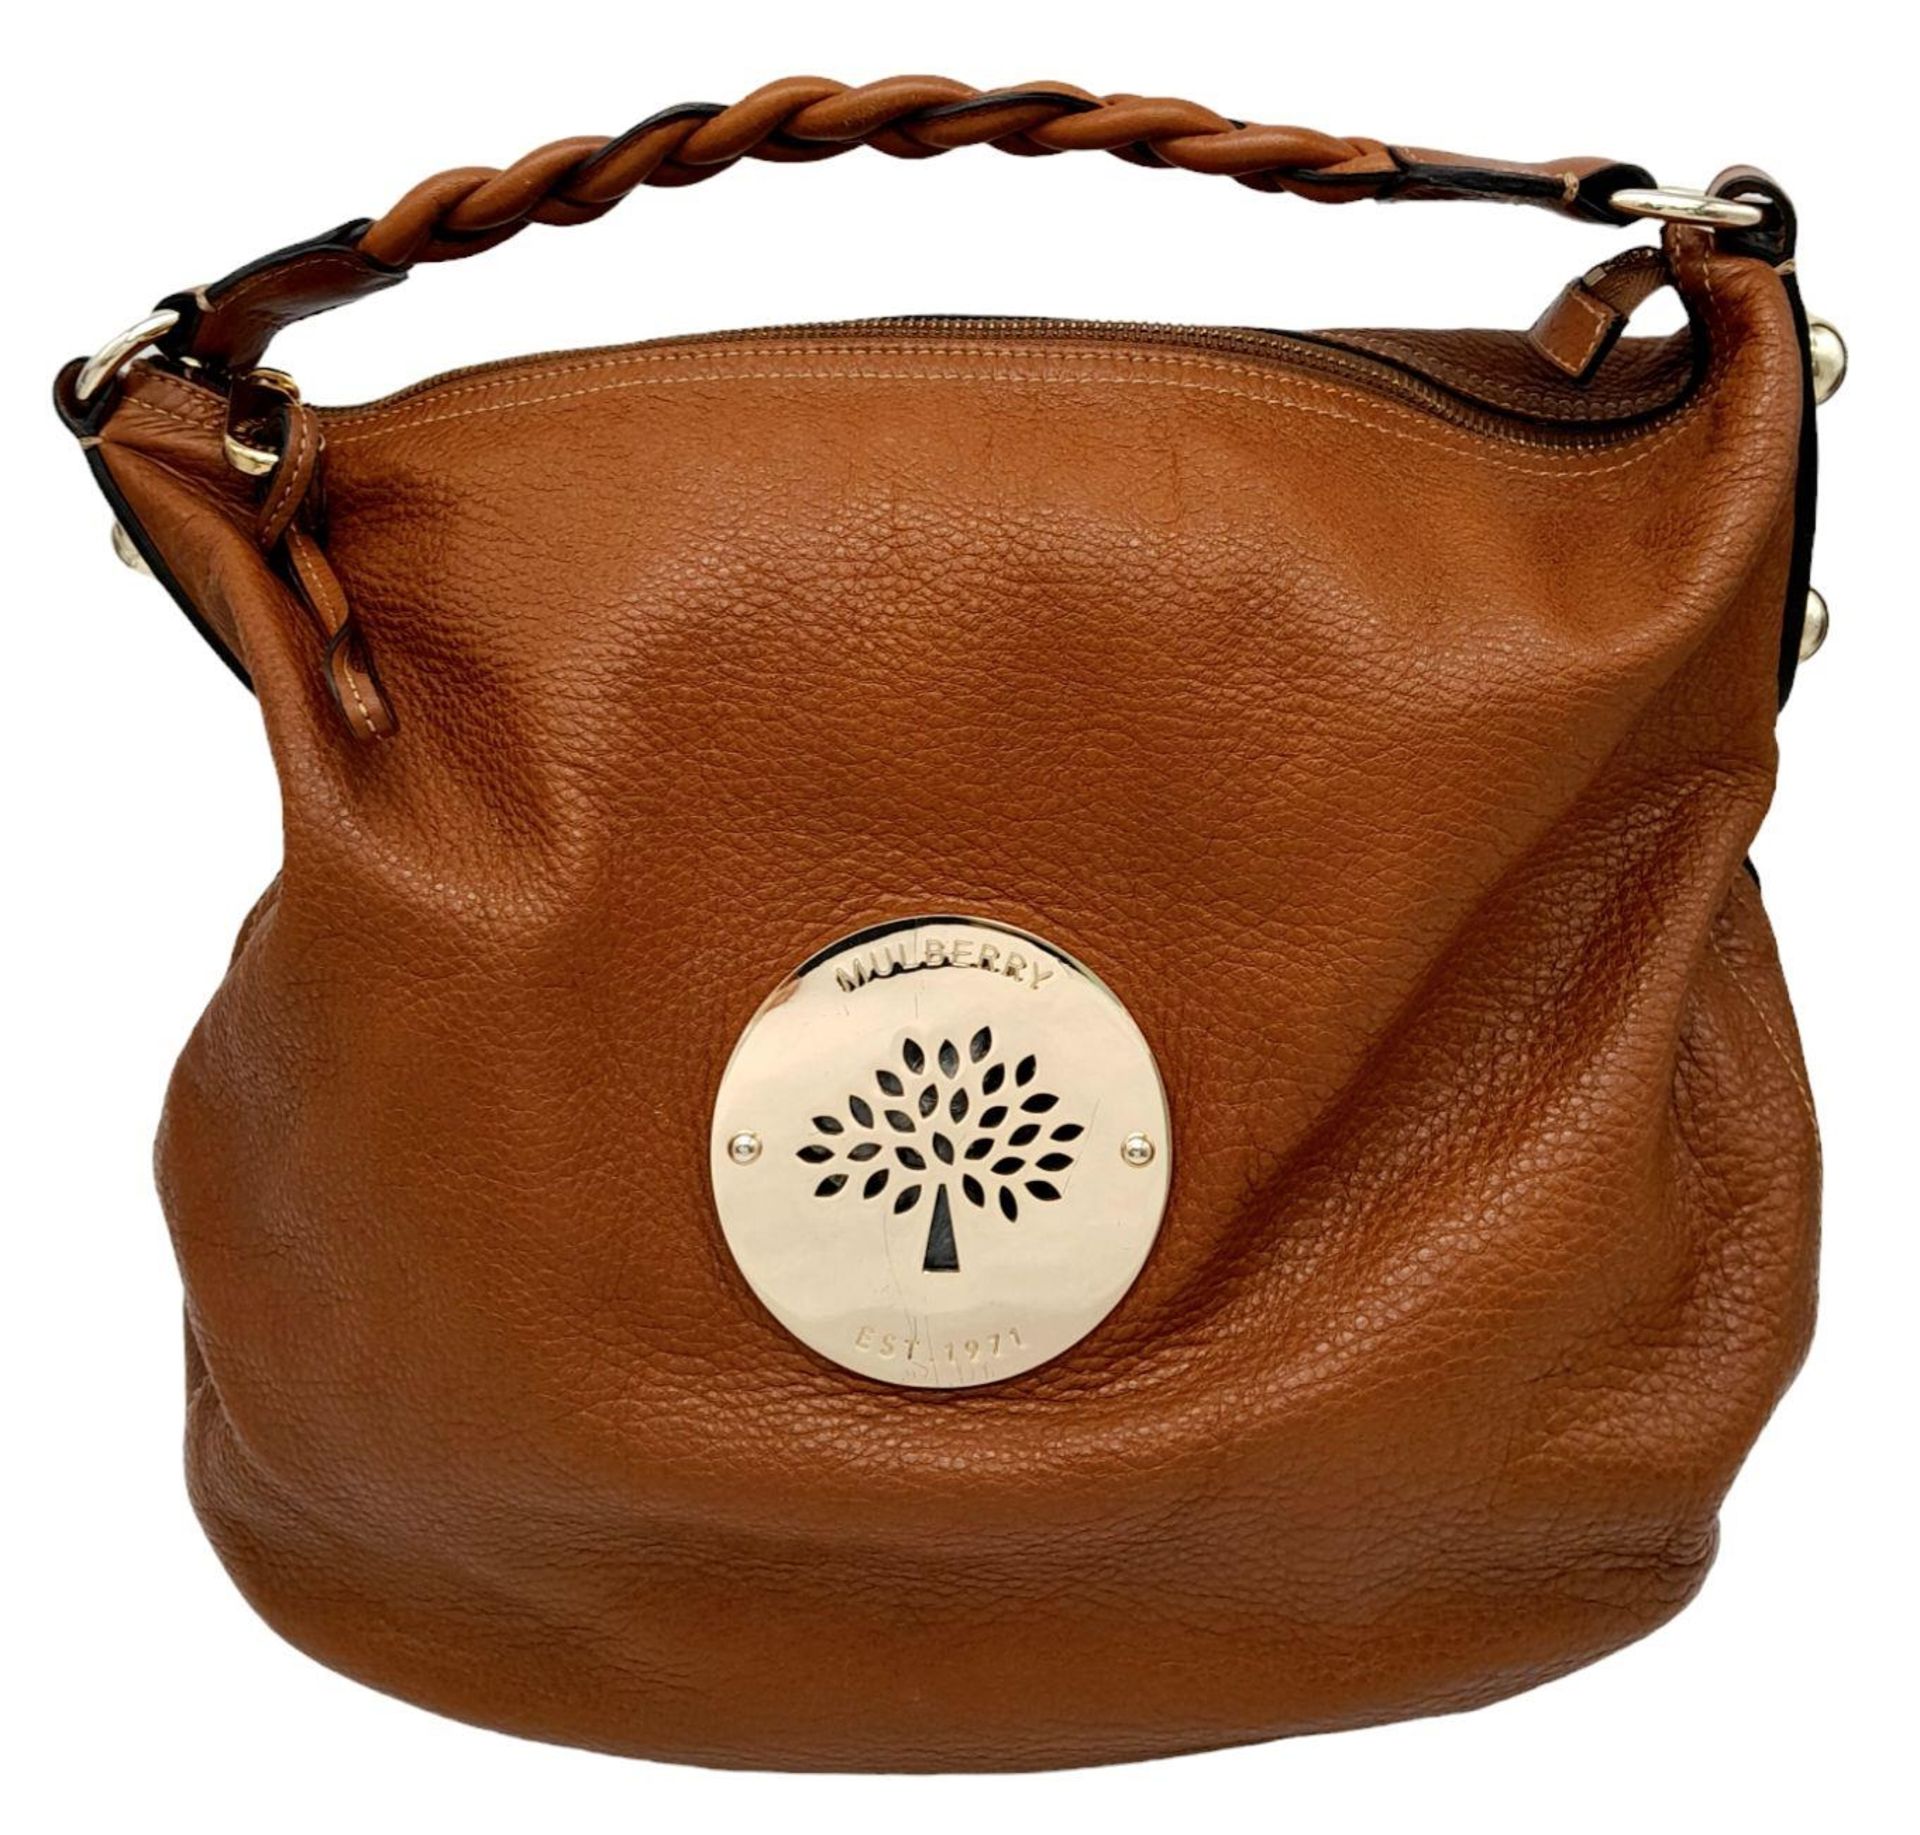 A Mulberry Tan Daria Hobo Bag. Leather exterior with gold-toned hardware, braided strap and zip